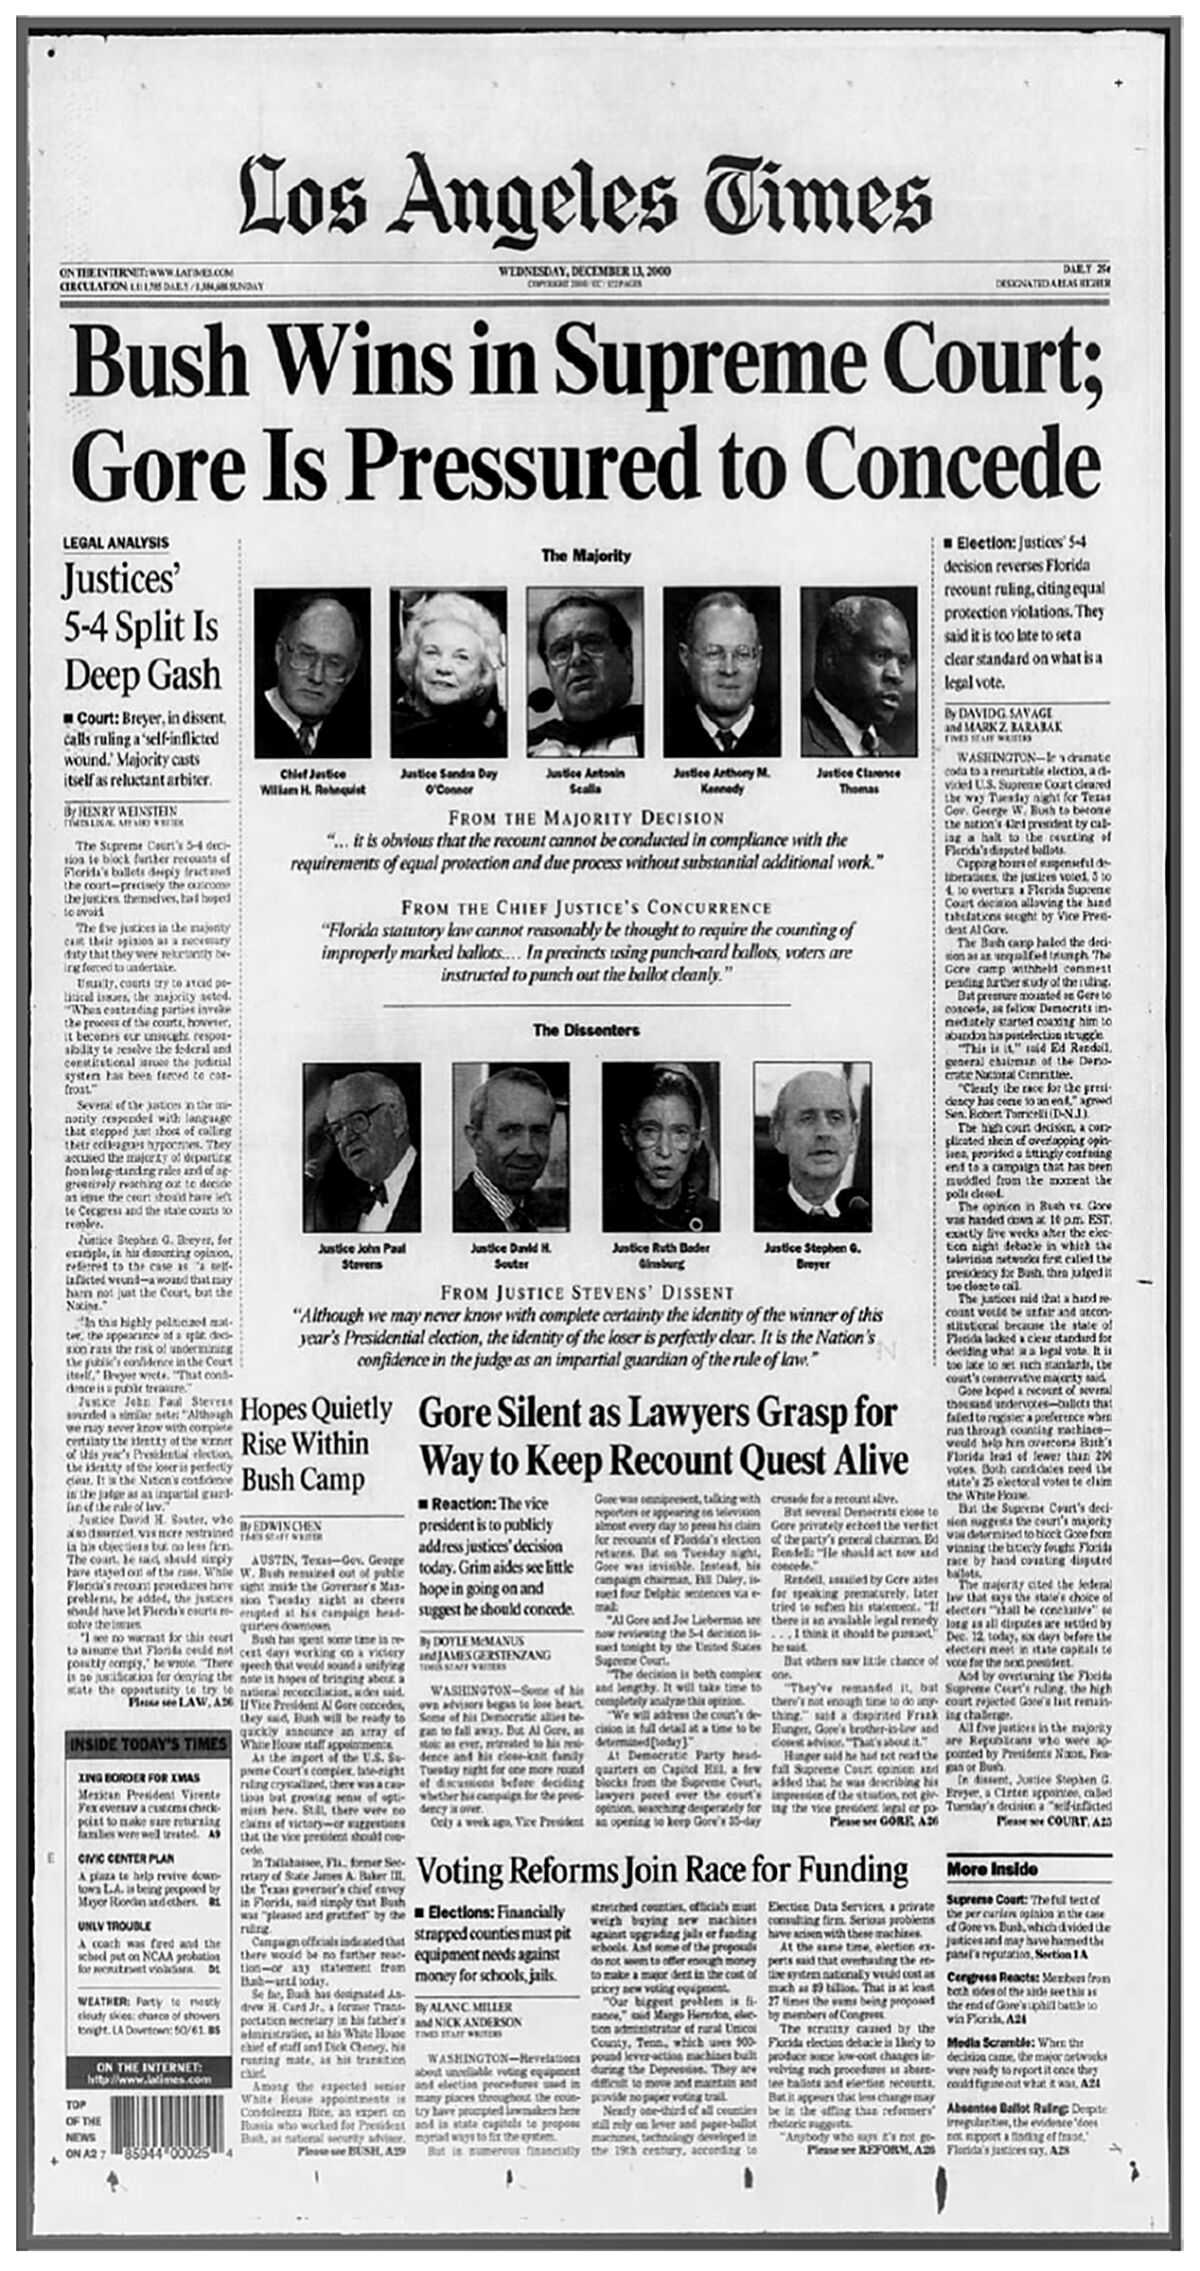 A newspaper front page